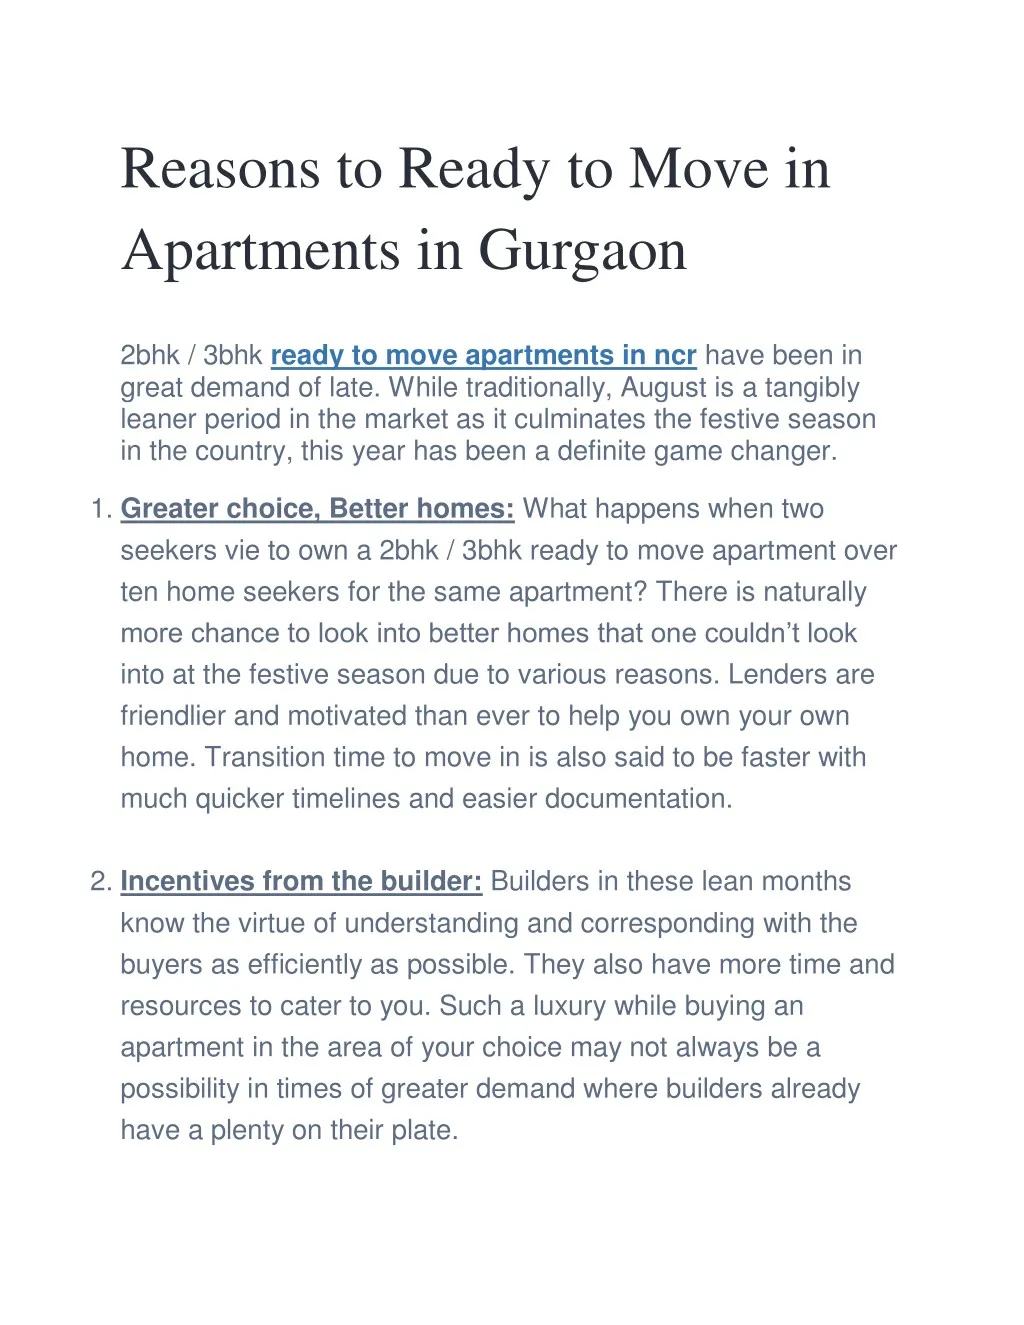 reasons to ready to move in apartments in gurgaon